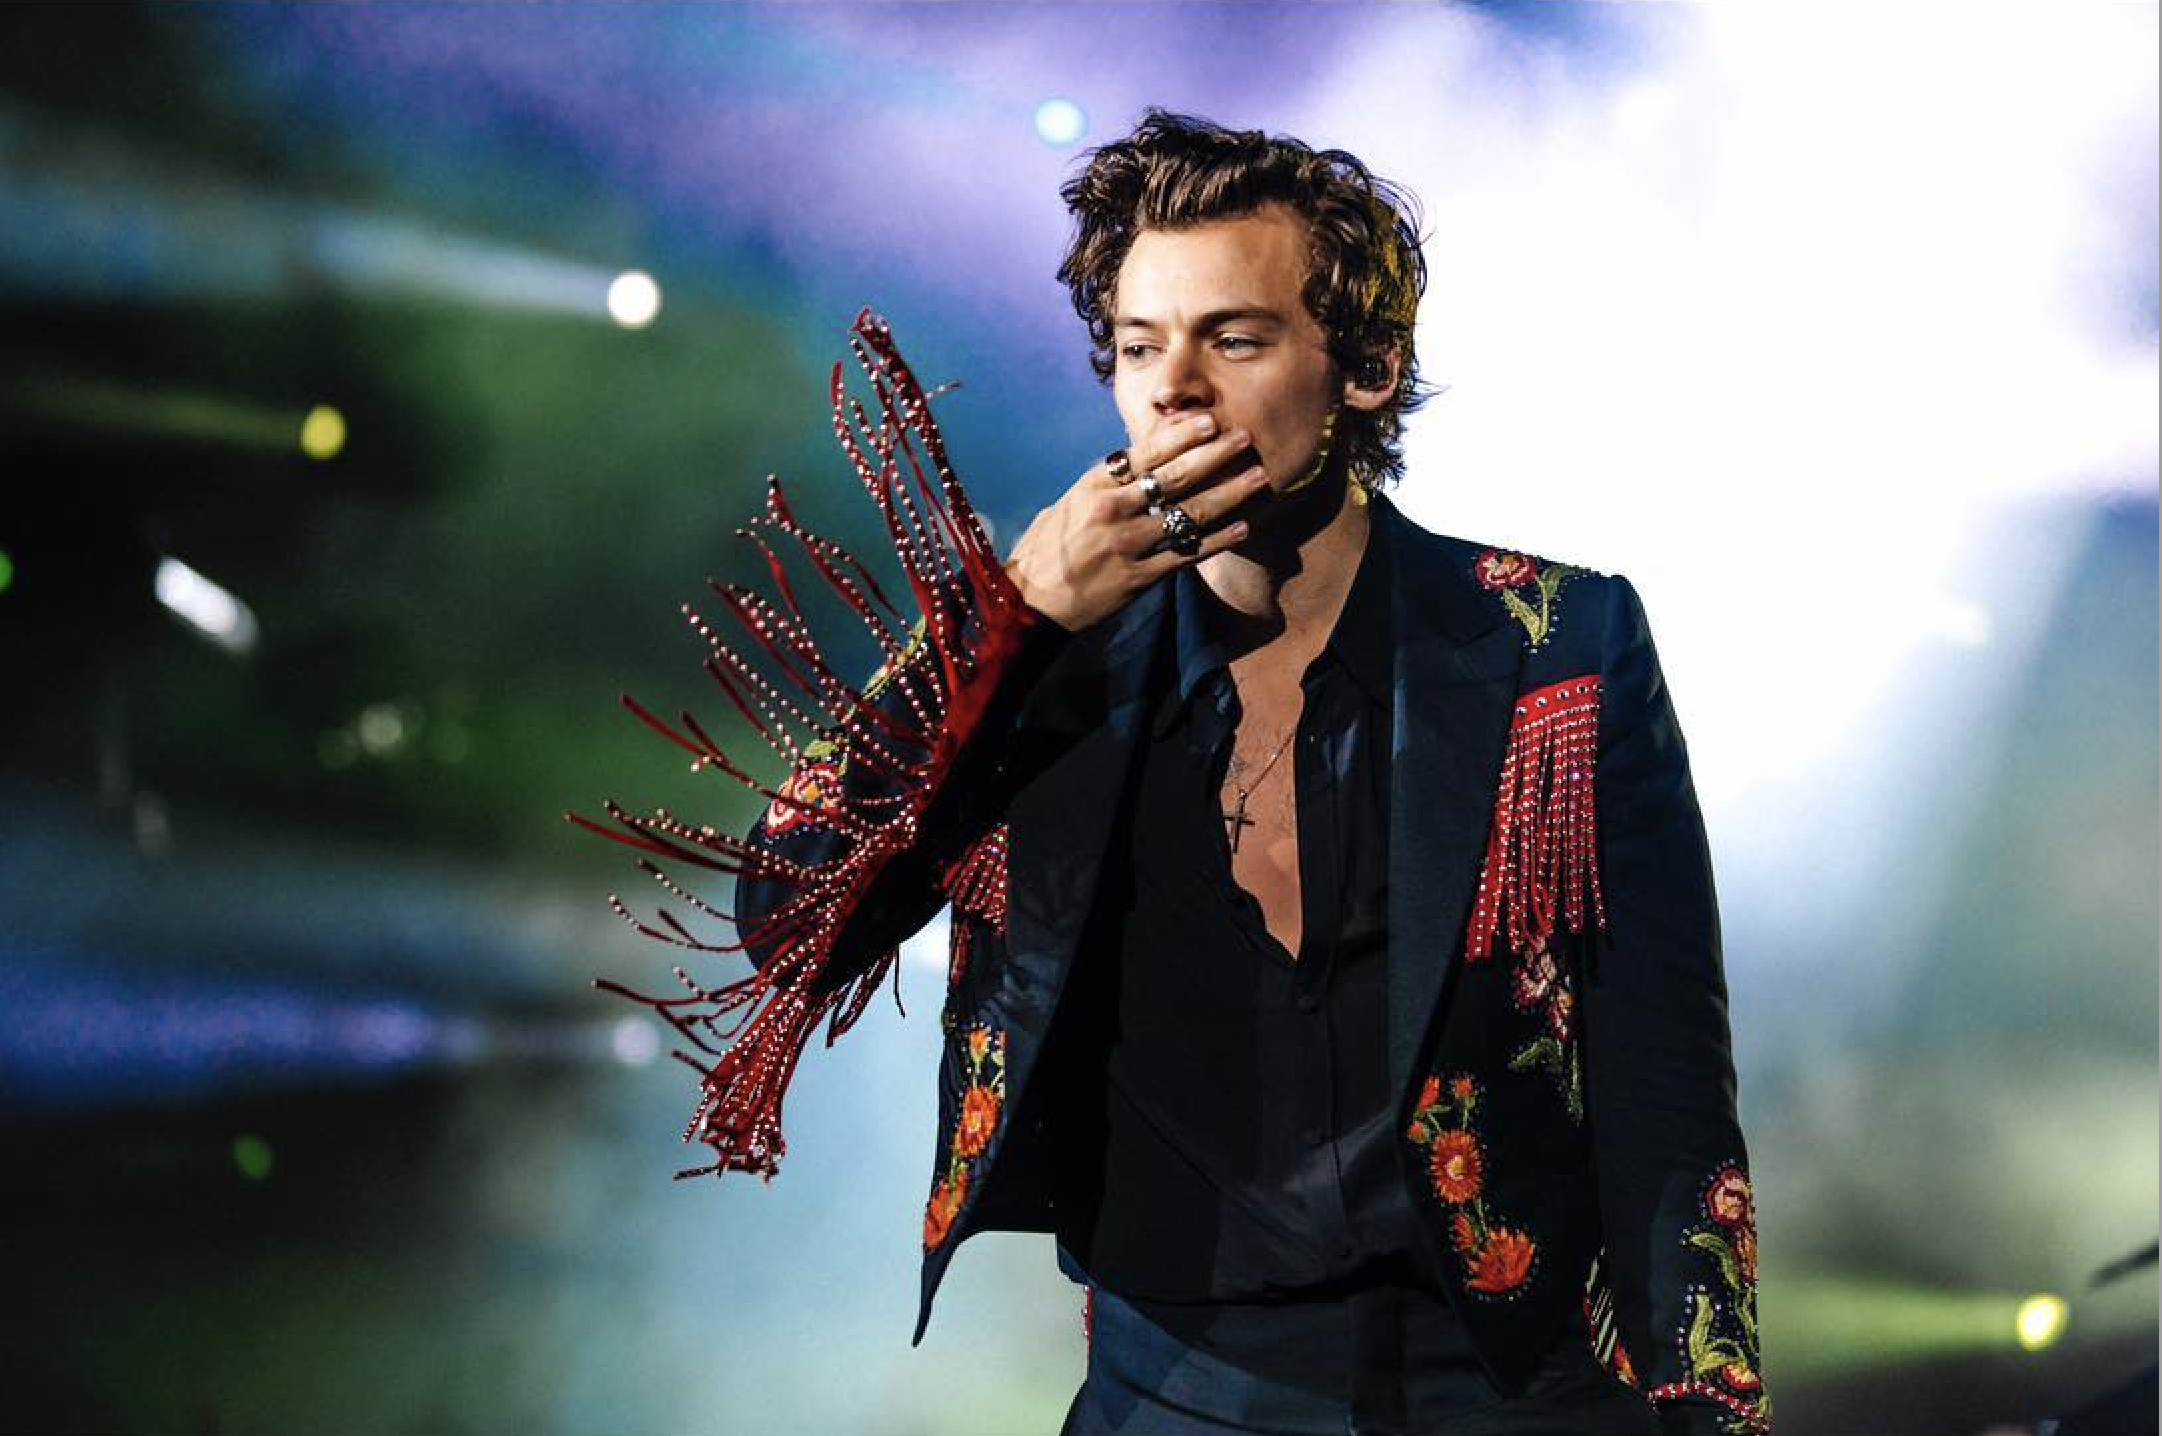 How does singer Harry Styles, formerly of One Direction, spend his money? Photo: @harrystyles/Instagram